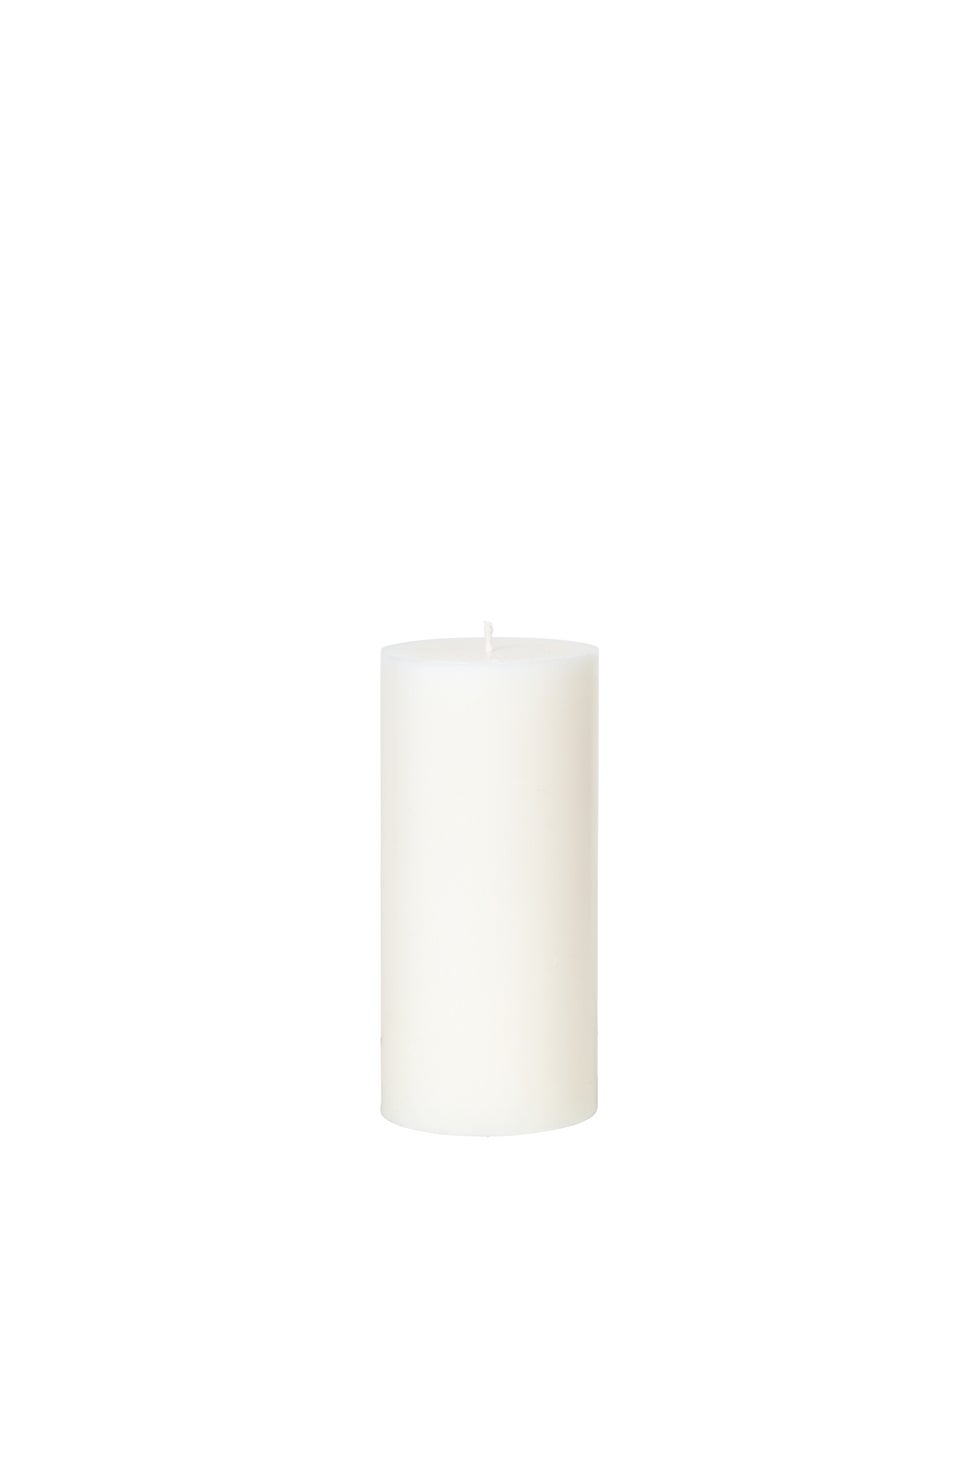 BROSTE Candle Stearin Pure White 7 x 15cm